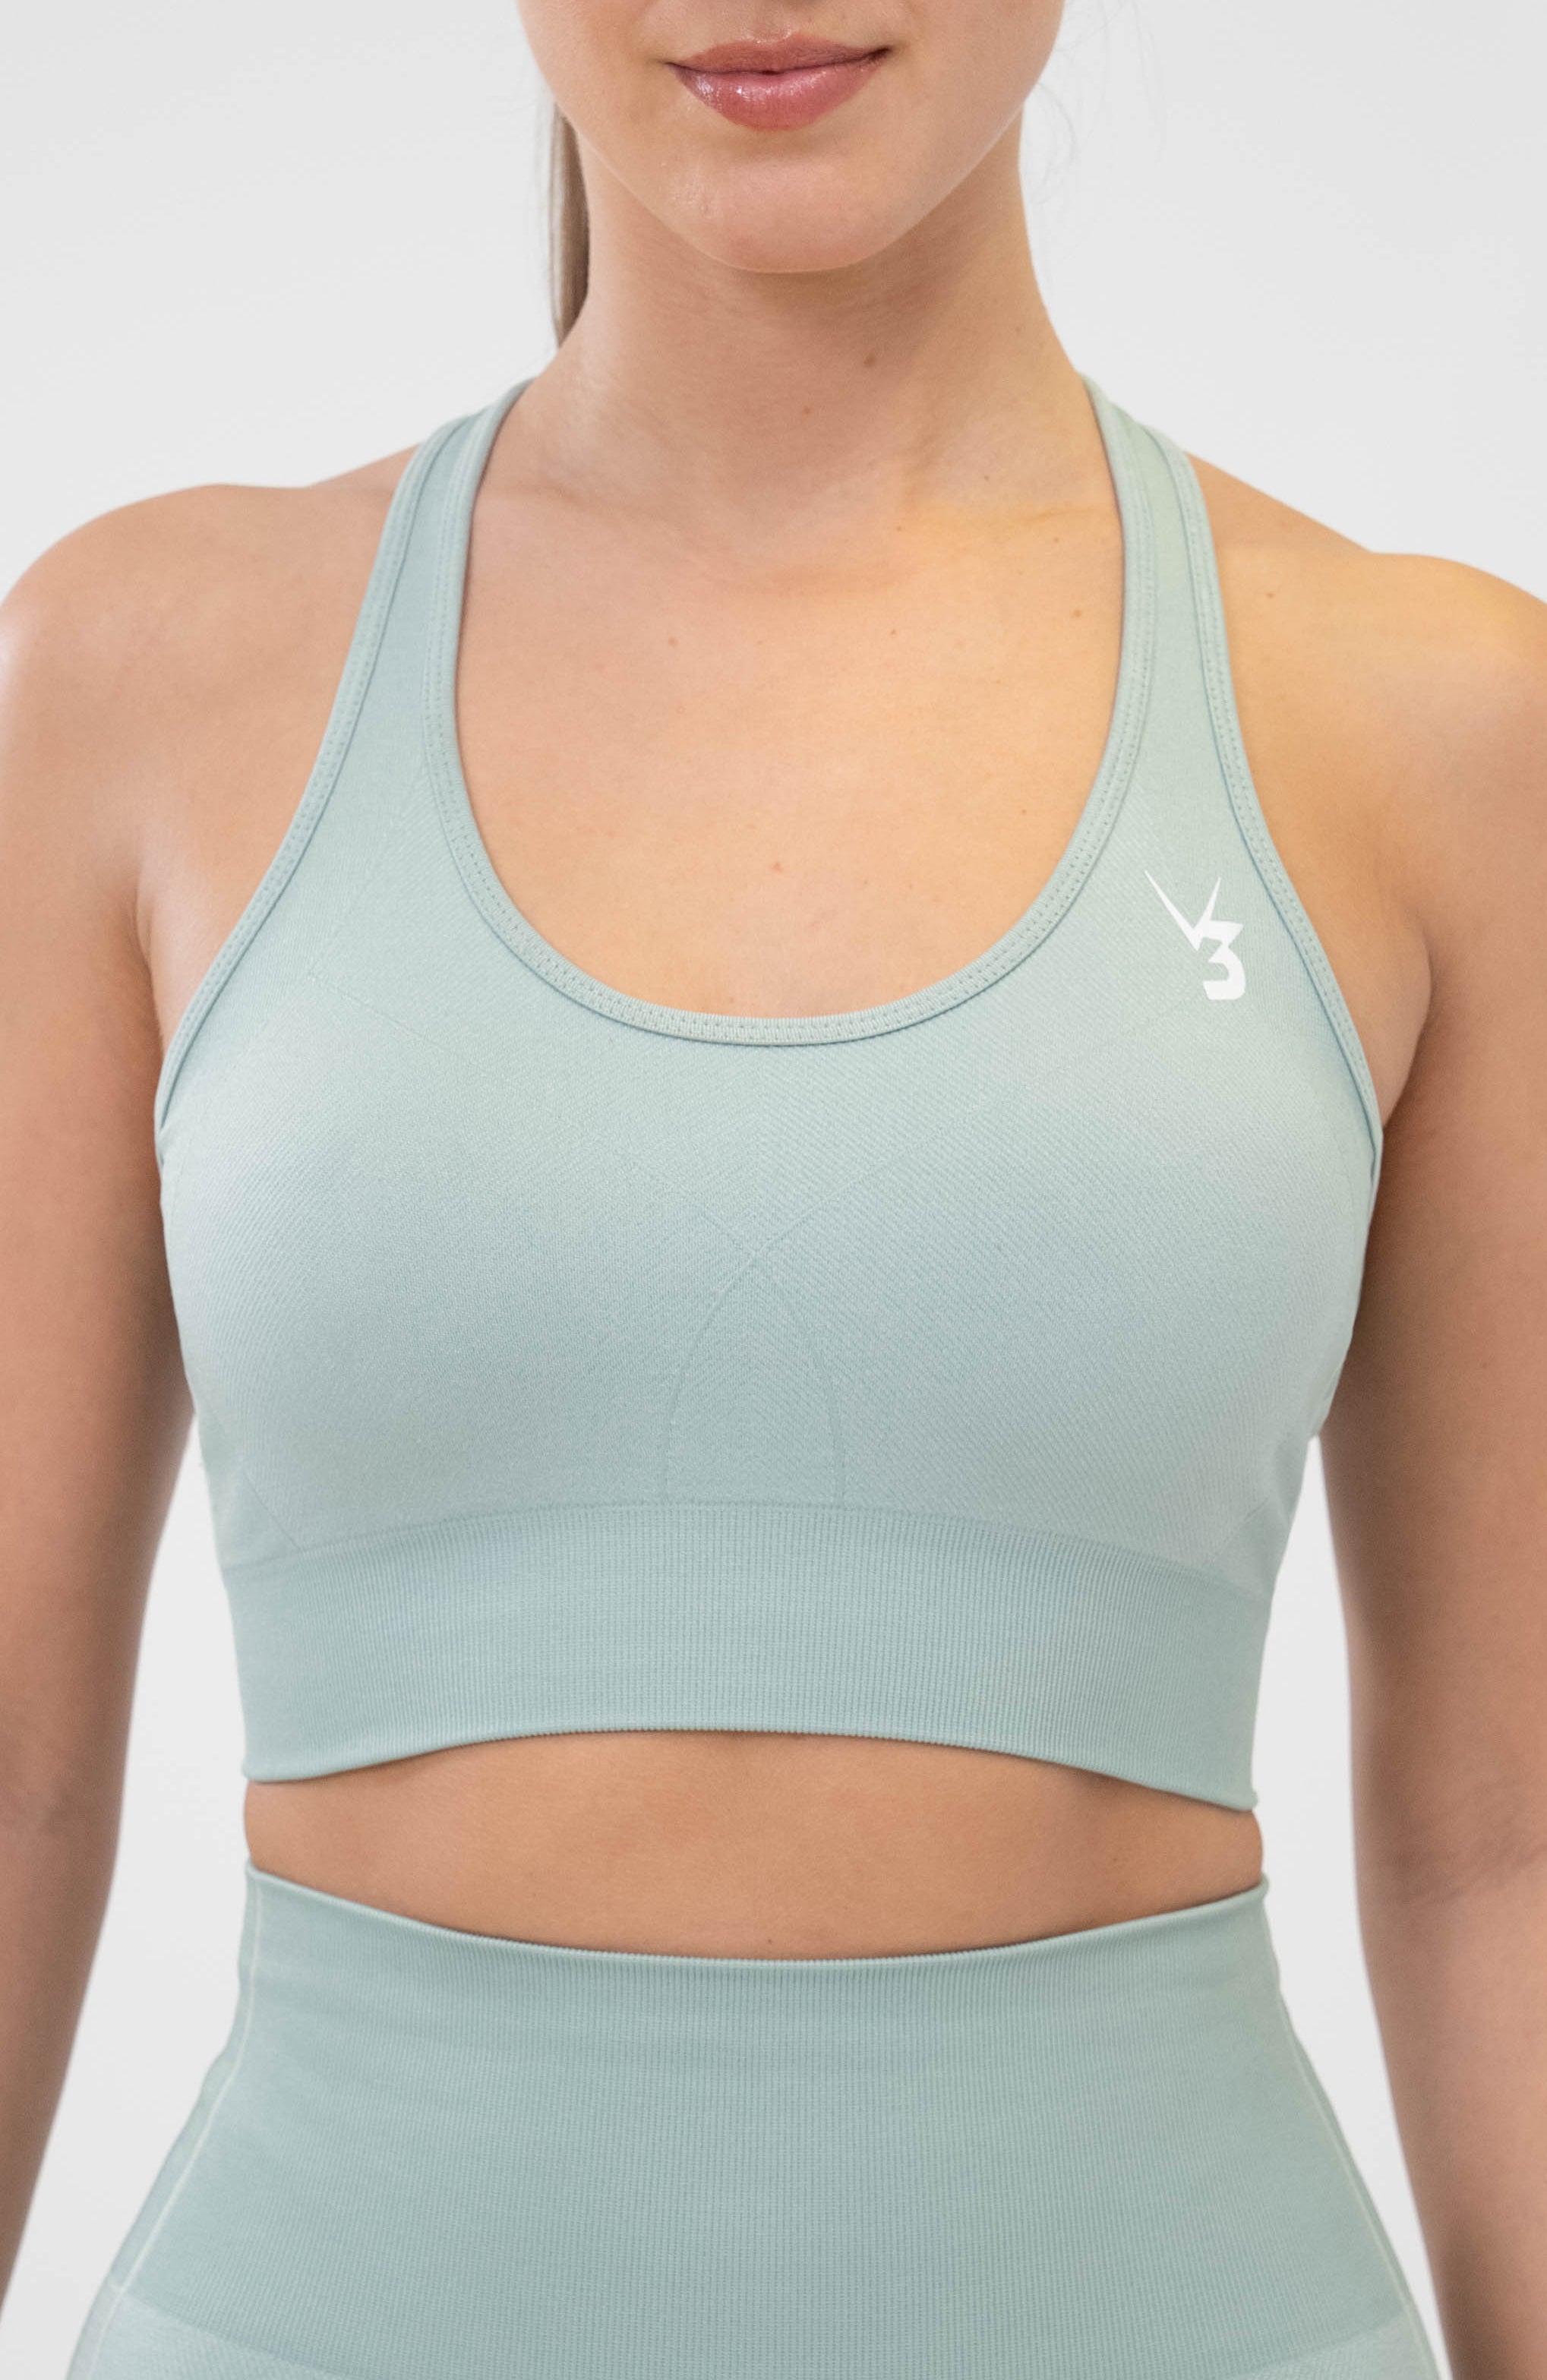 redbaysand Women's seamless Unity training sports bra in mint green with removable padded cups and strap for gym workouts training, Running, yoga, bodybuilding and bikini fitness.